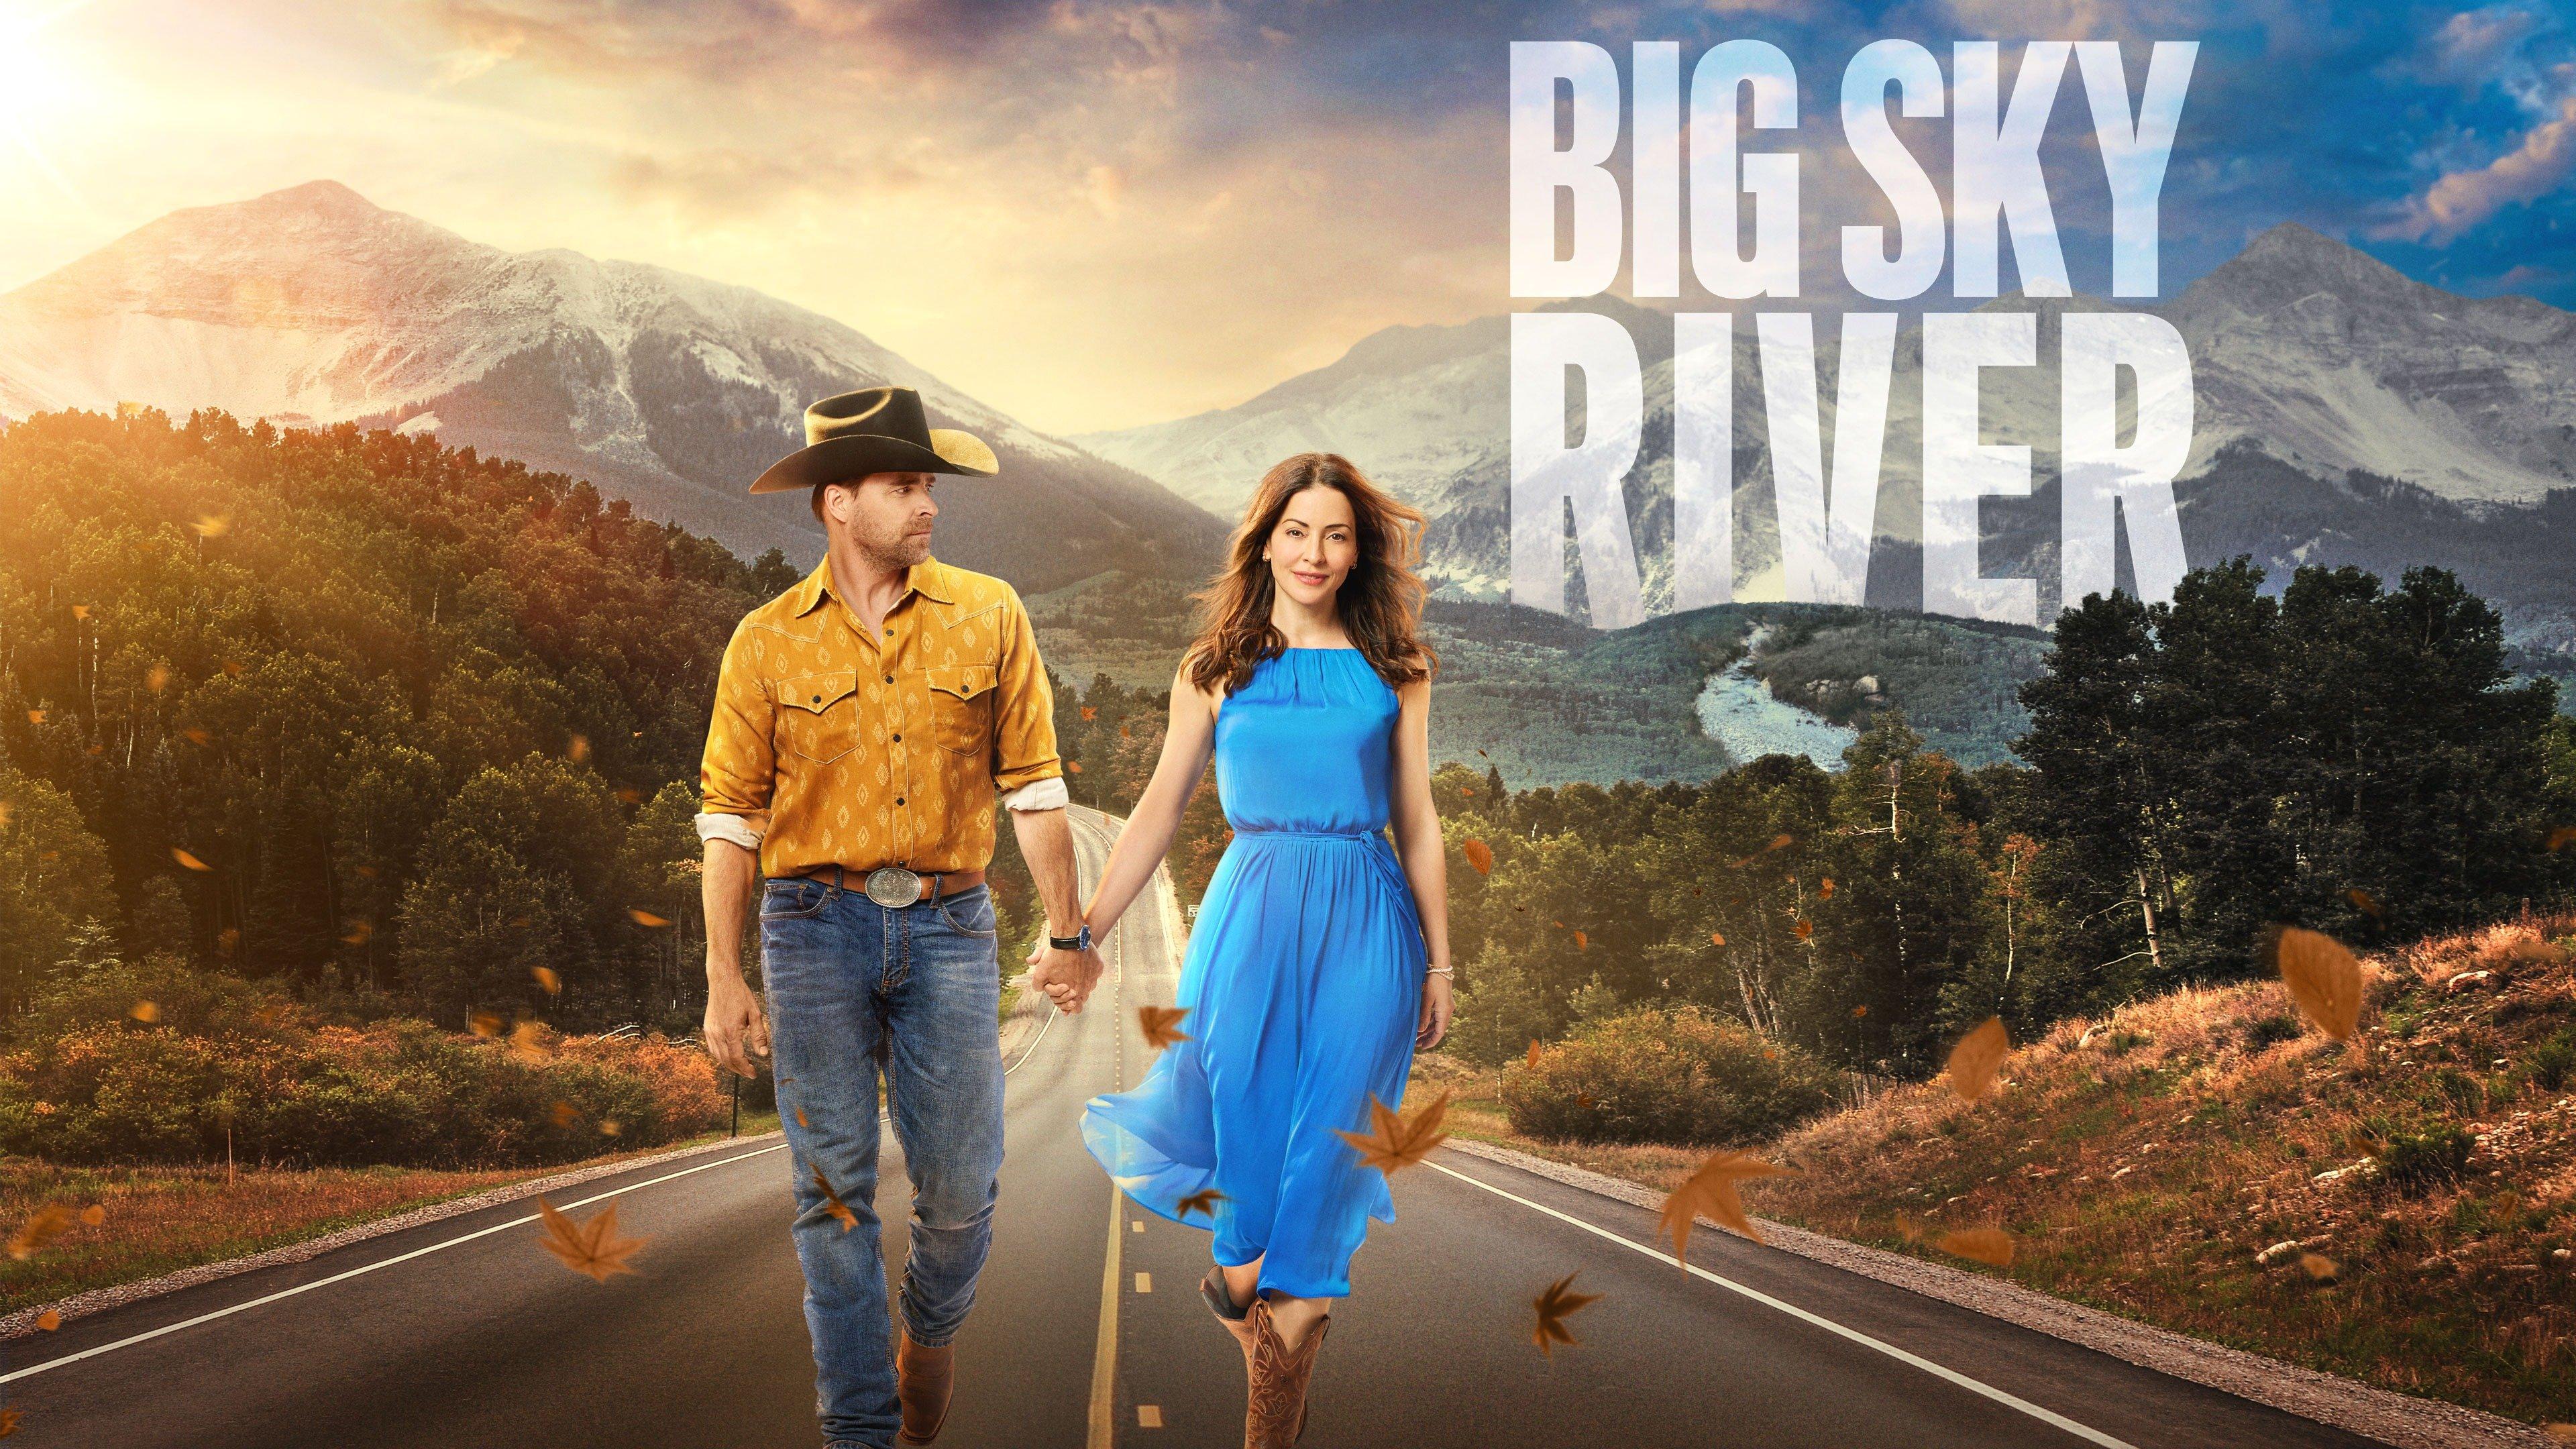 Watch Big Sky River Streaming Online on Philo (Free Trial)